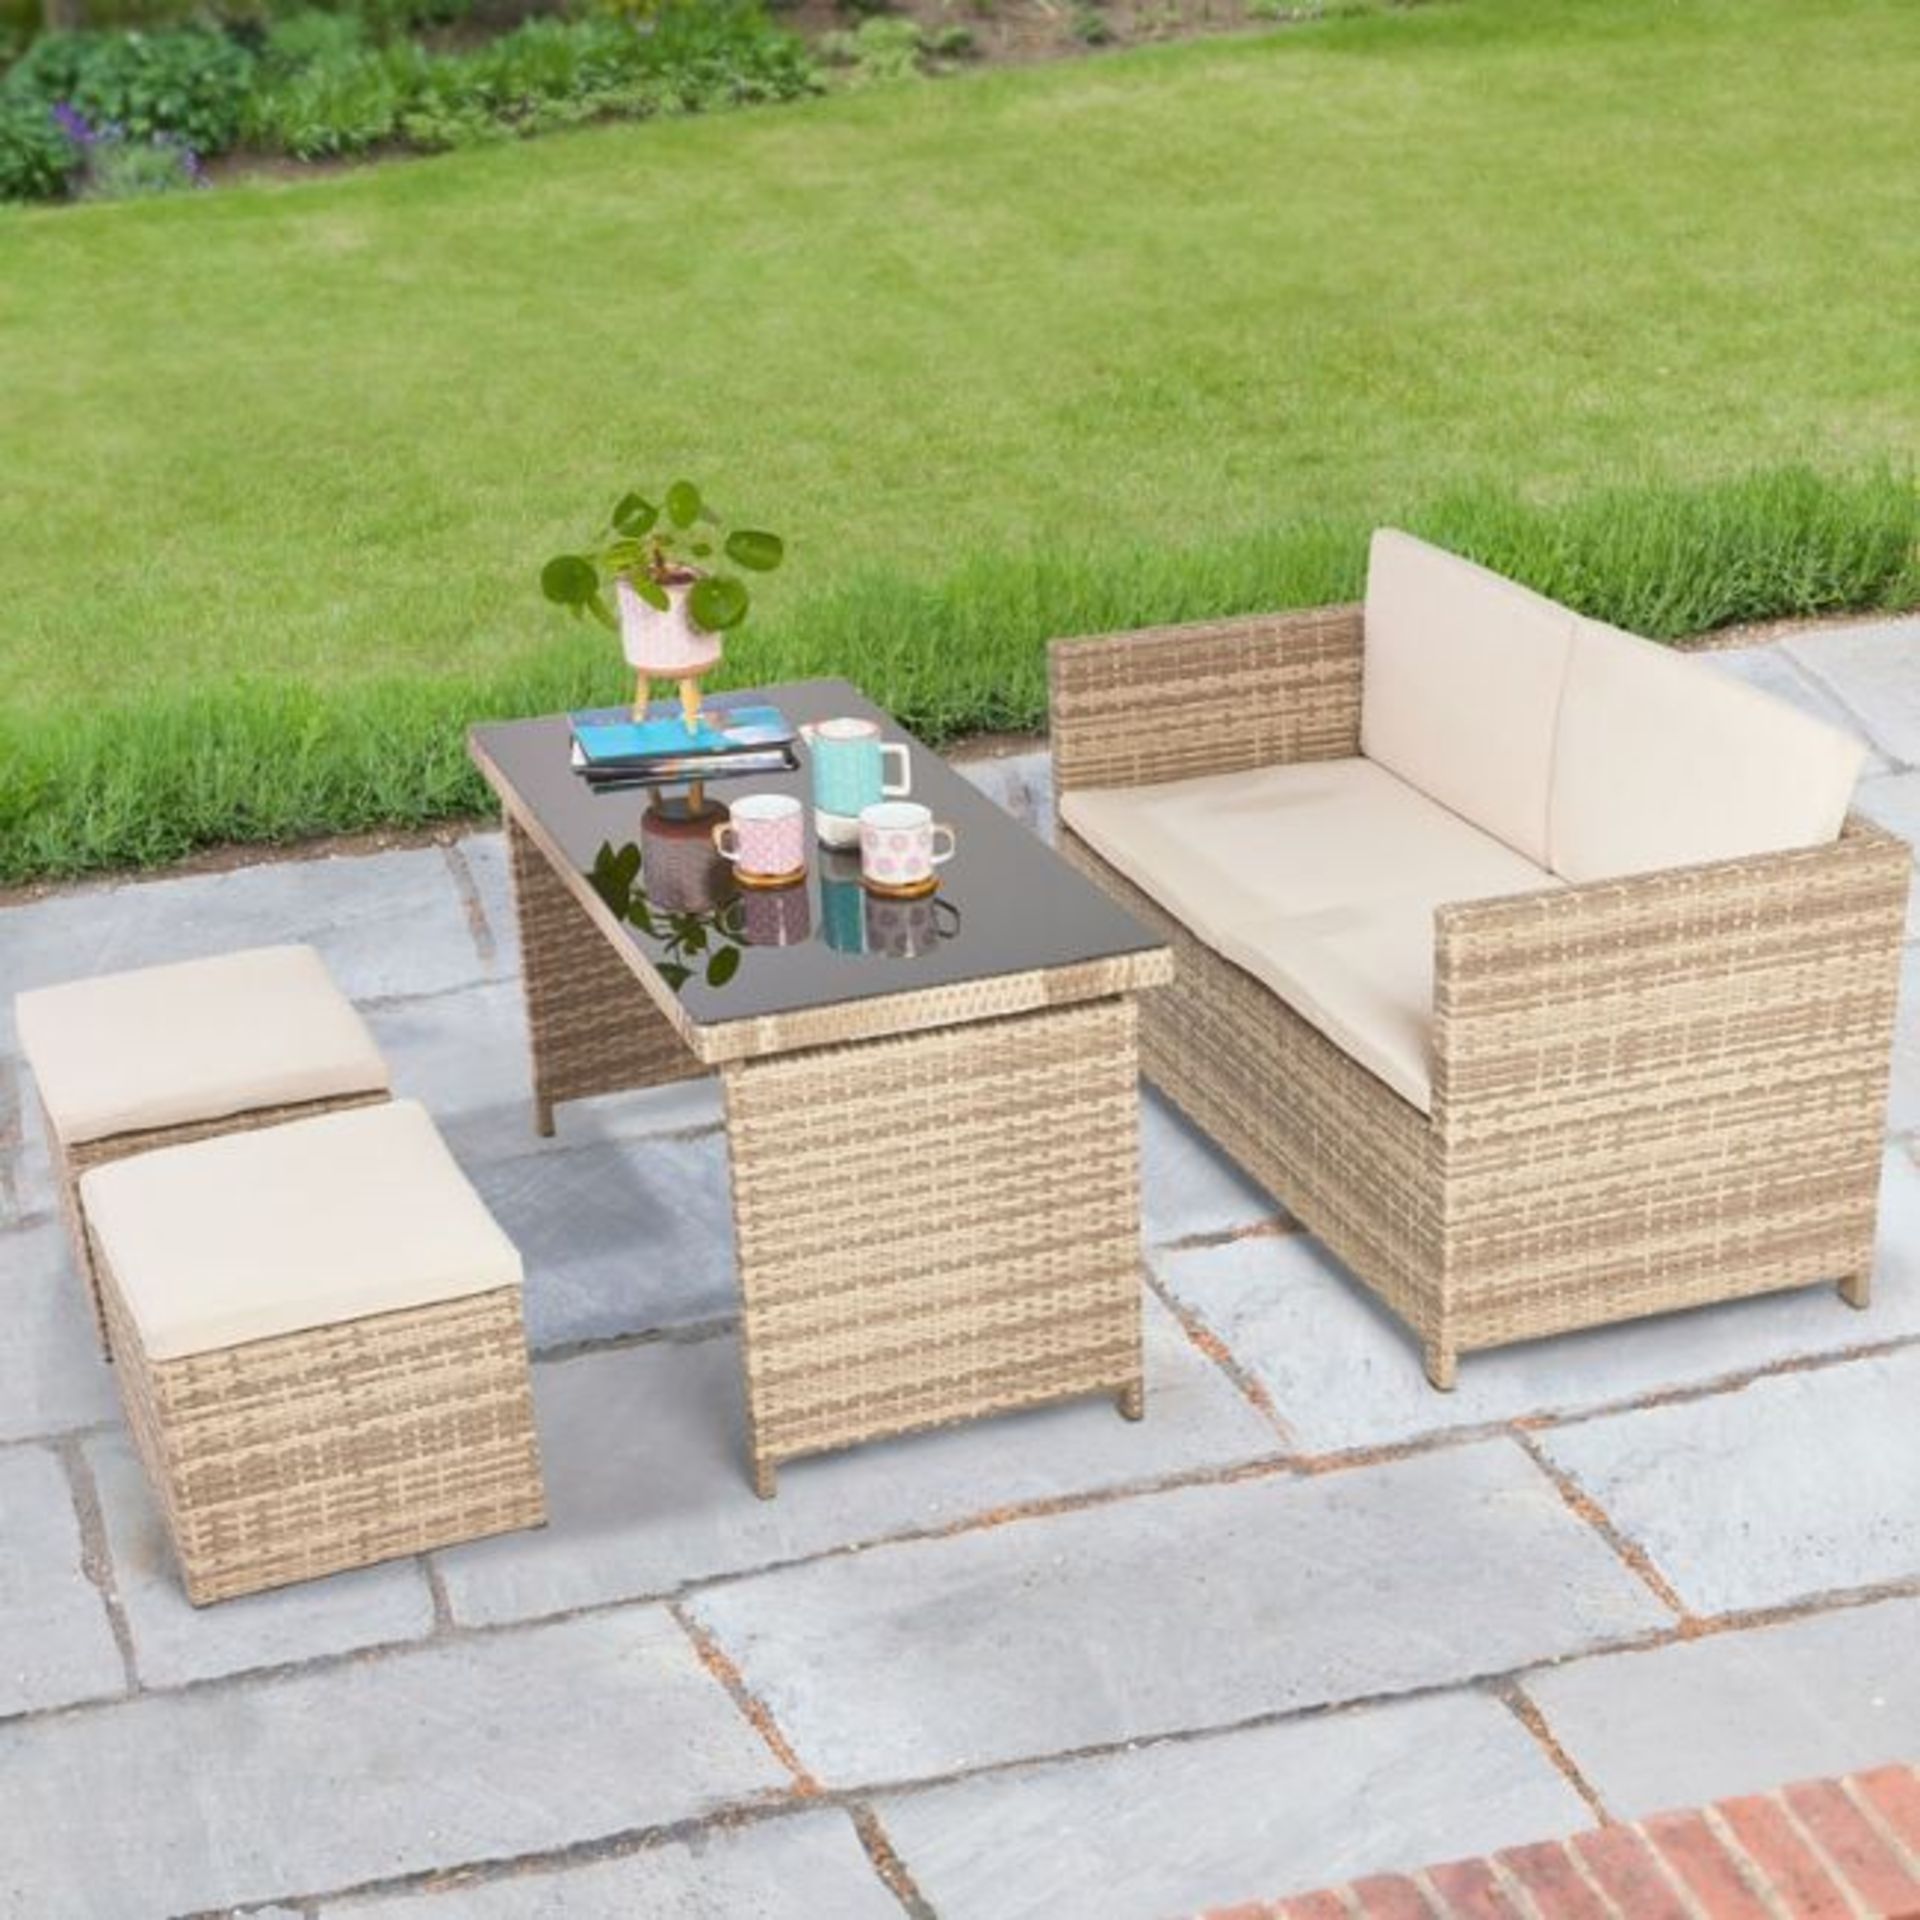 5 x ABLO Orion 4 Seater Rattan Dining Set - ABLOXLS018